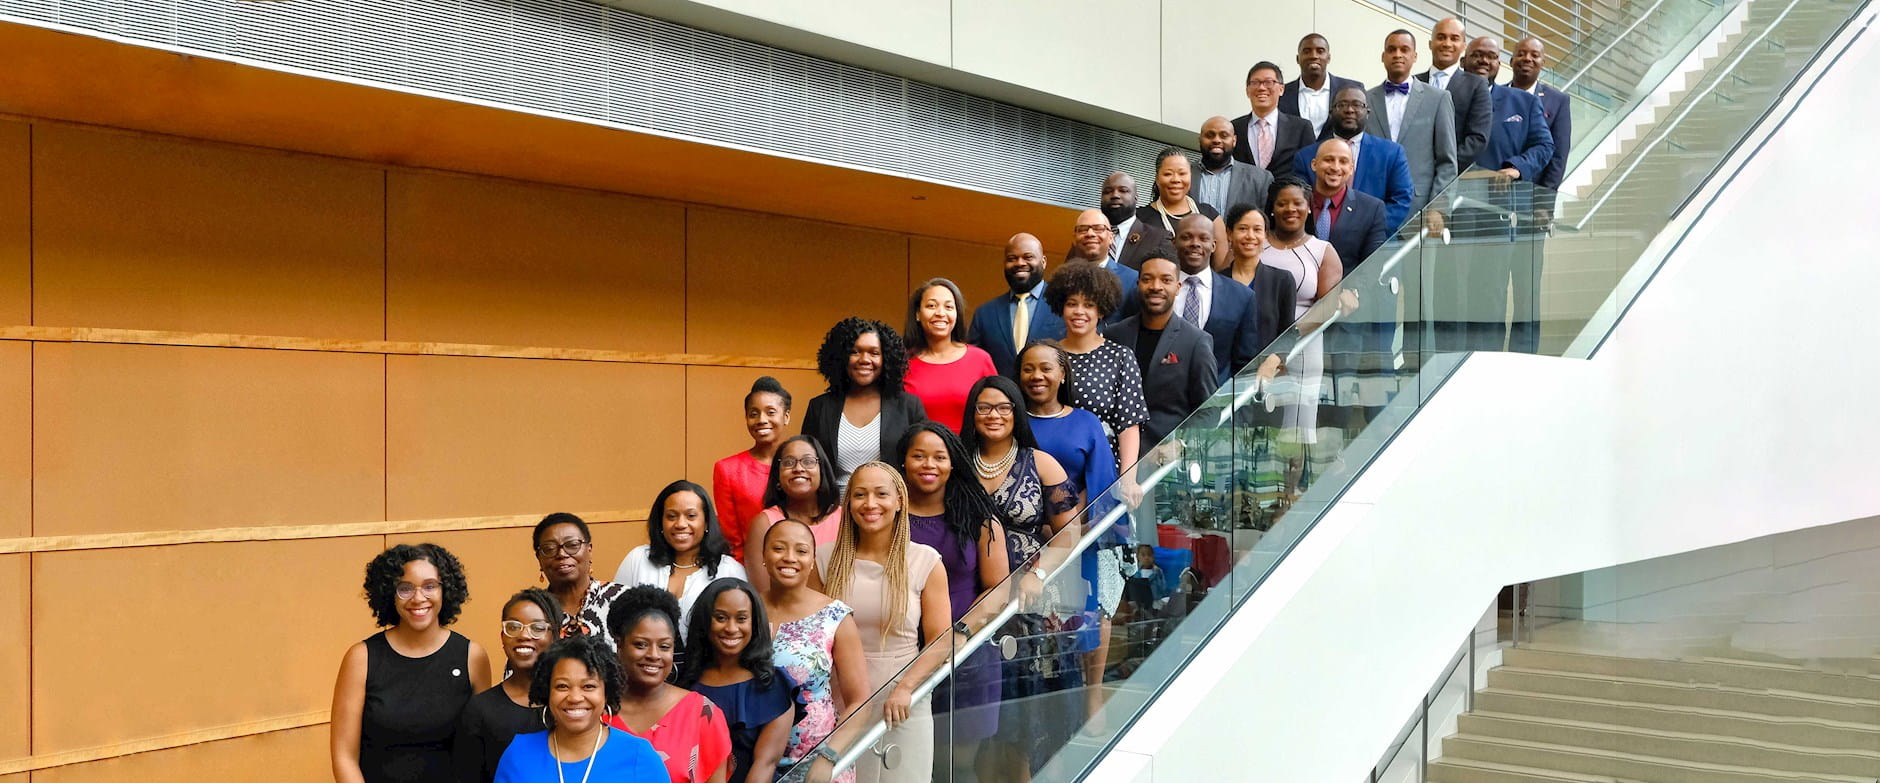 2019 IMPACT Fellows posing on stairs at Harper Center